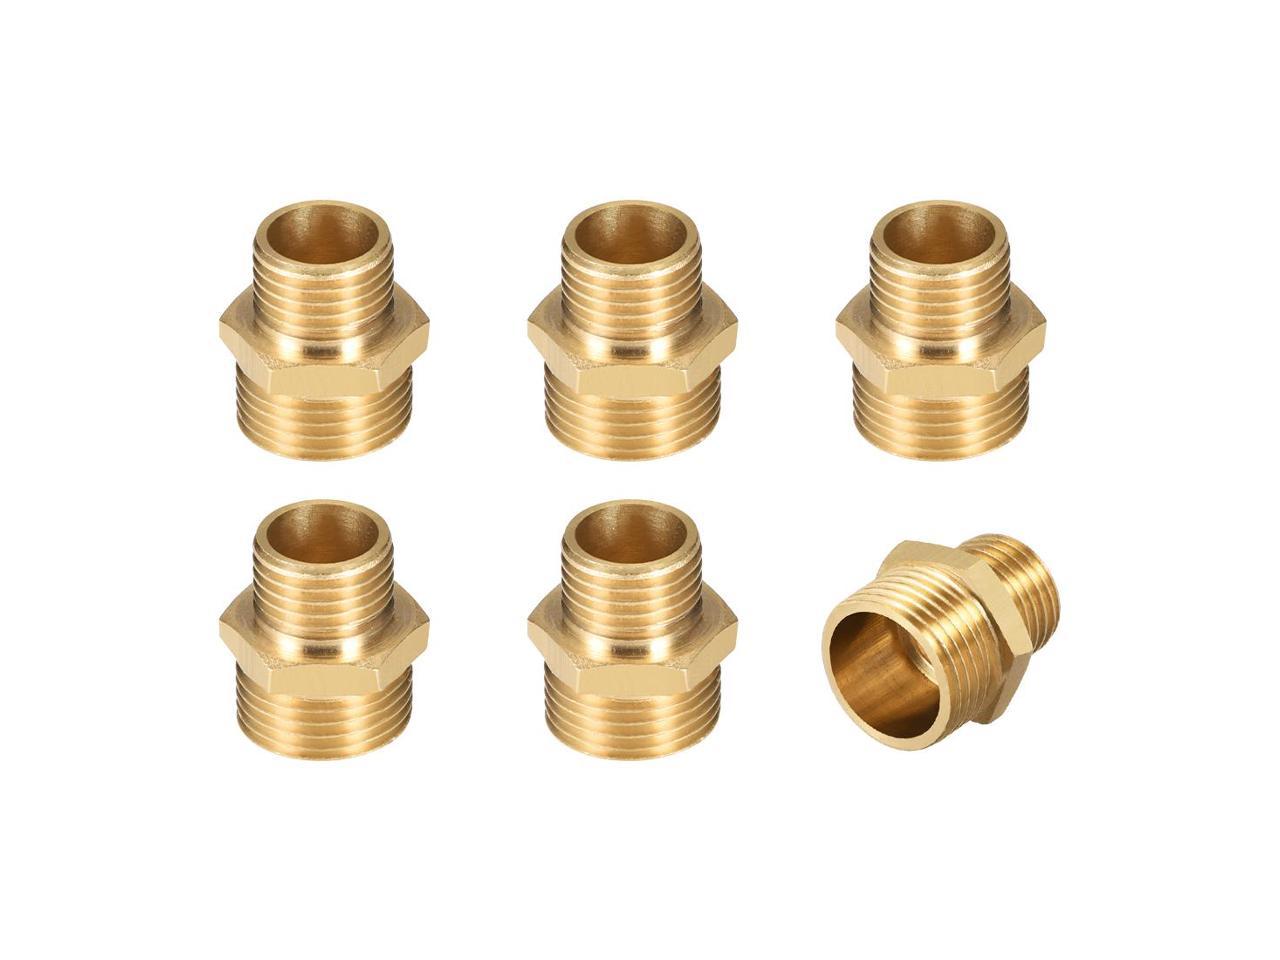 6pcs Gold Tone Hex Reducing Nipple G1/4 to G3/8 Male Thread Pipe Brass Fitting 702105372999 